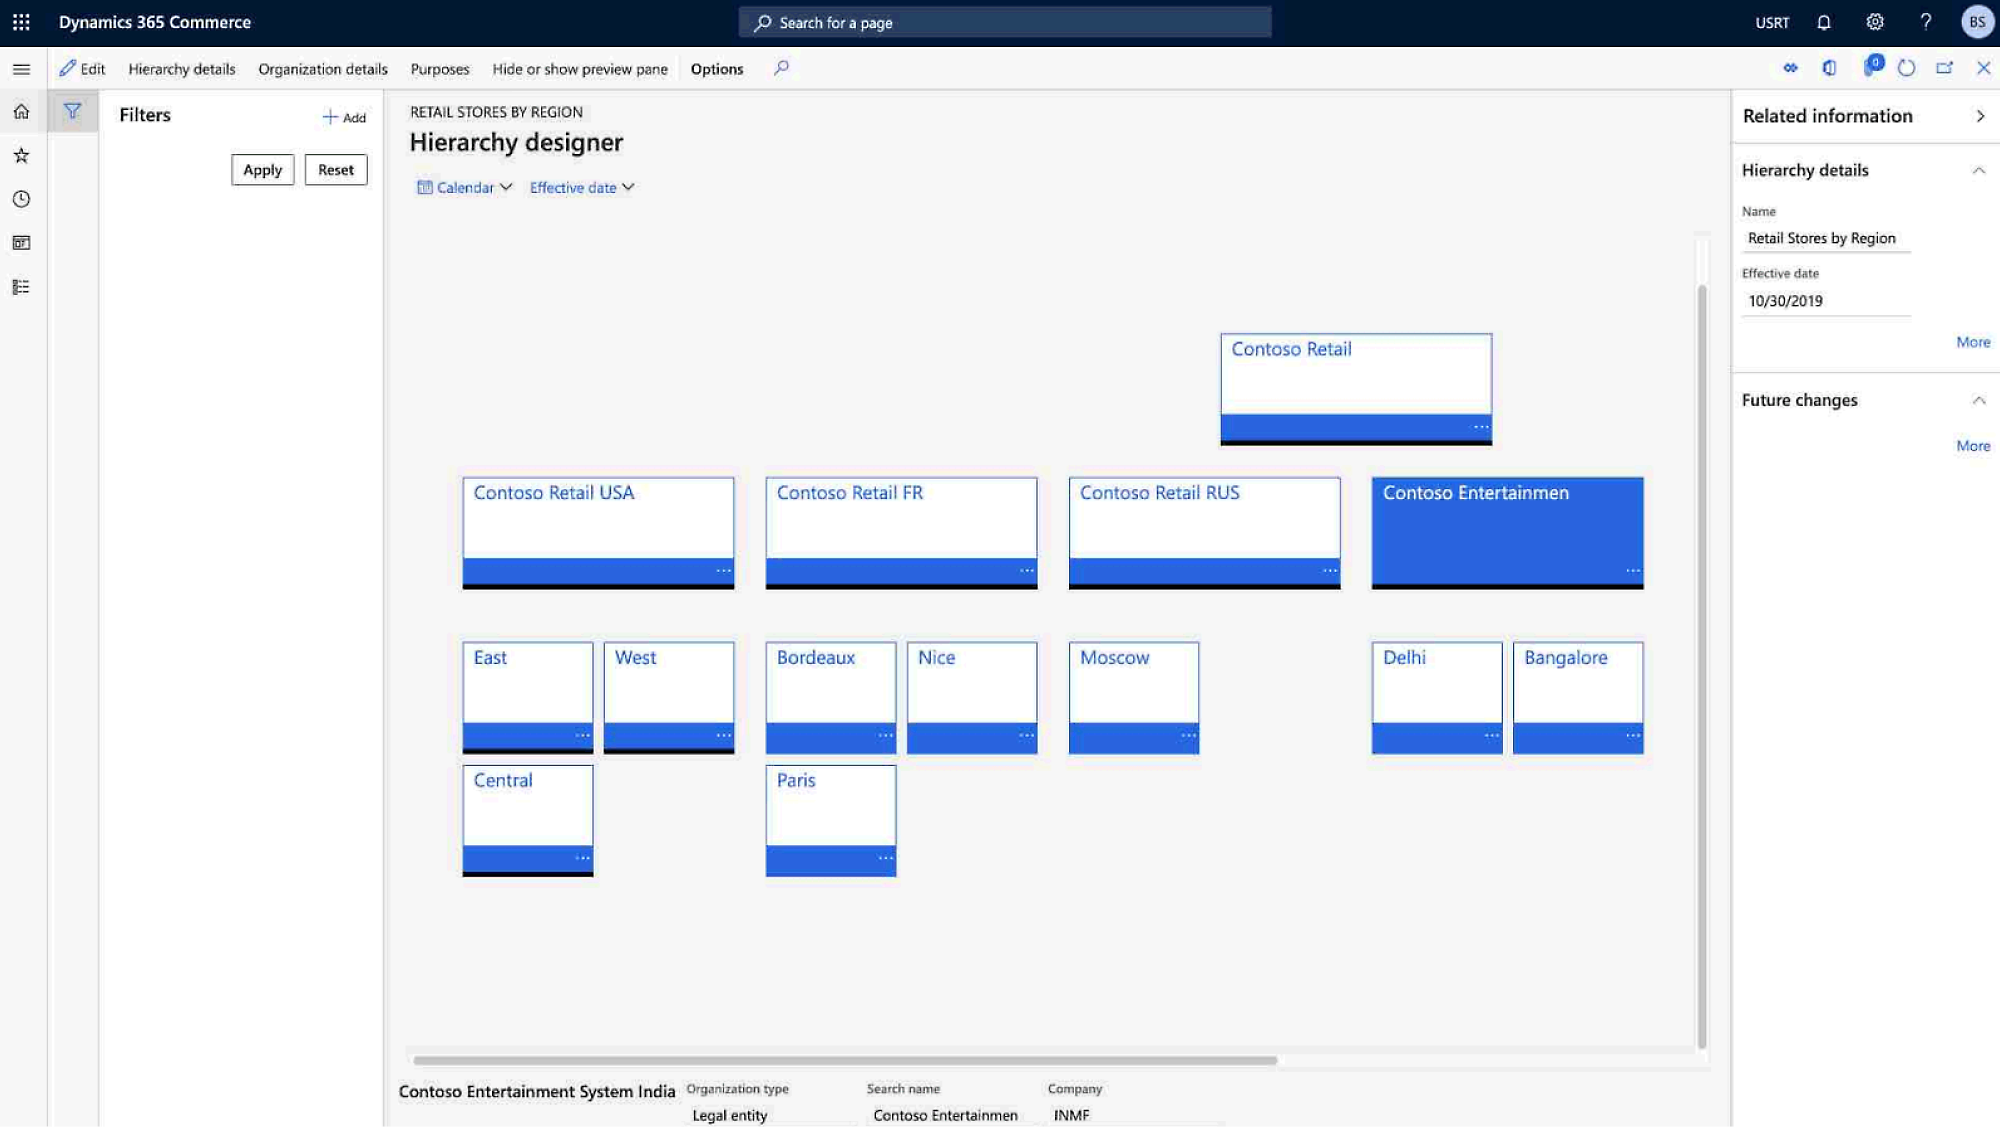 Screenshot of Dynamics 365 Commerce showing organizational hierarchy details with various retail stores listed by region.